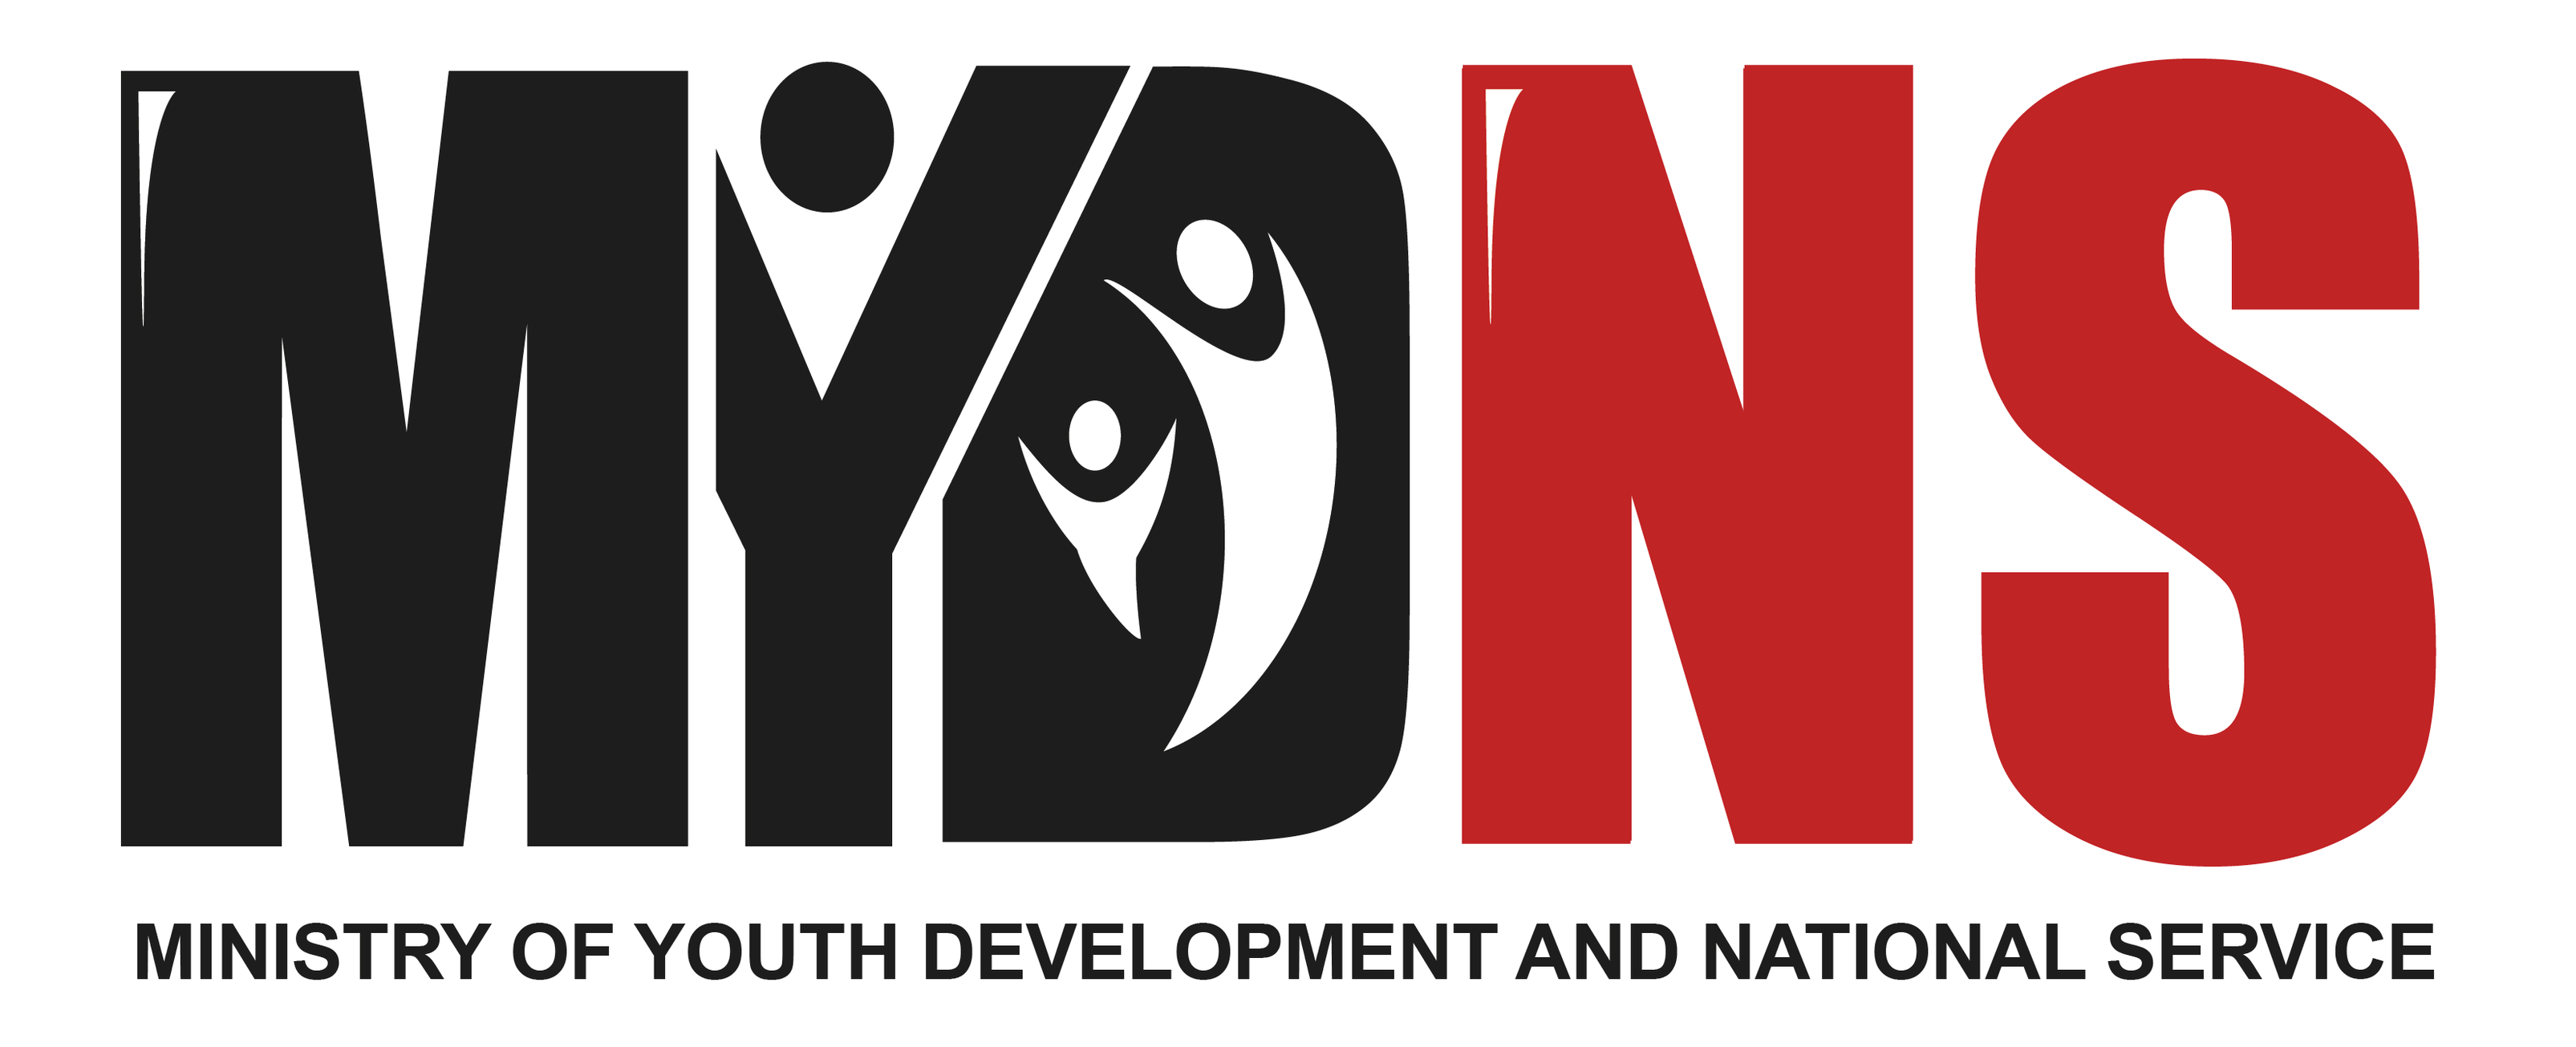 Youth Development Ministry To Commence Upgrades At Chatham Youth Camp